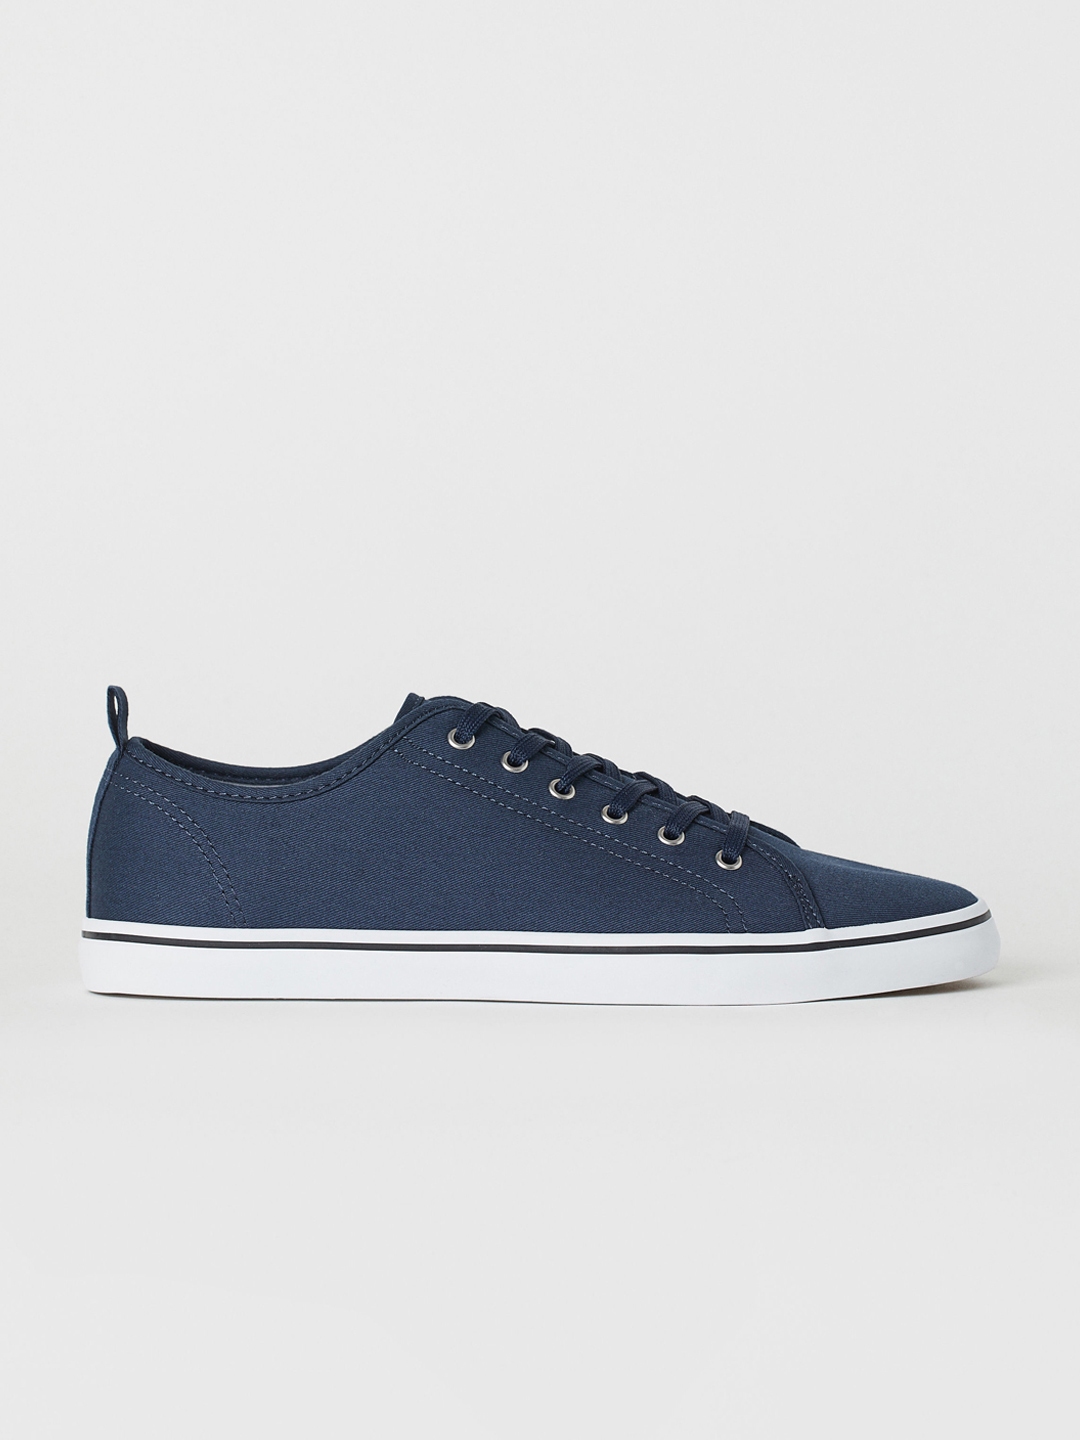 Buy H&M Men Blue Canvas Trainers - Casual Shoes for Men 10514814 | Myntra